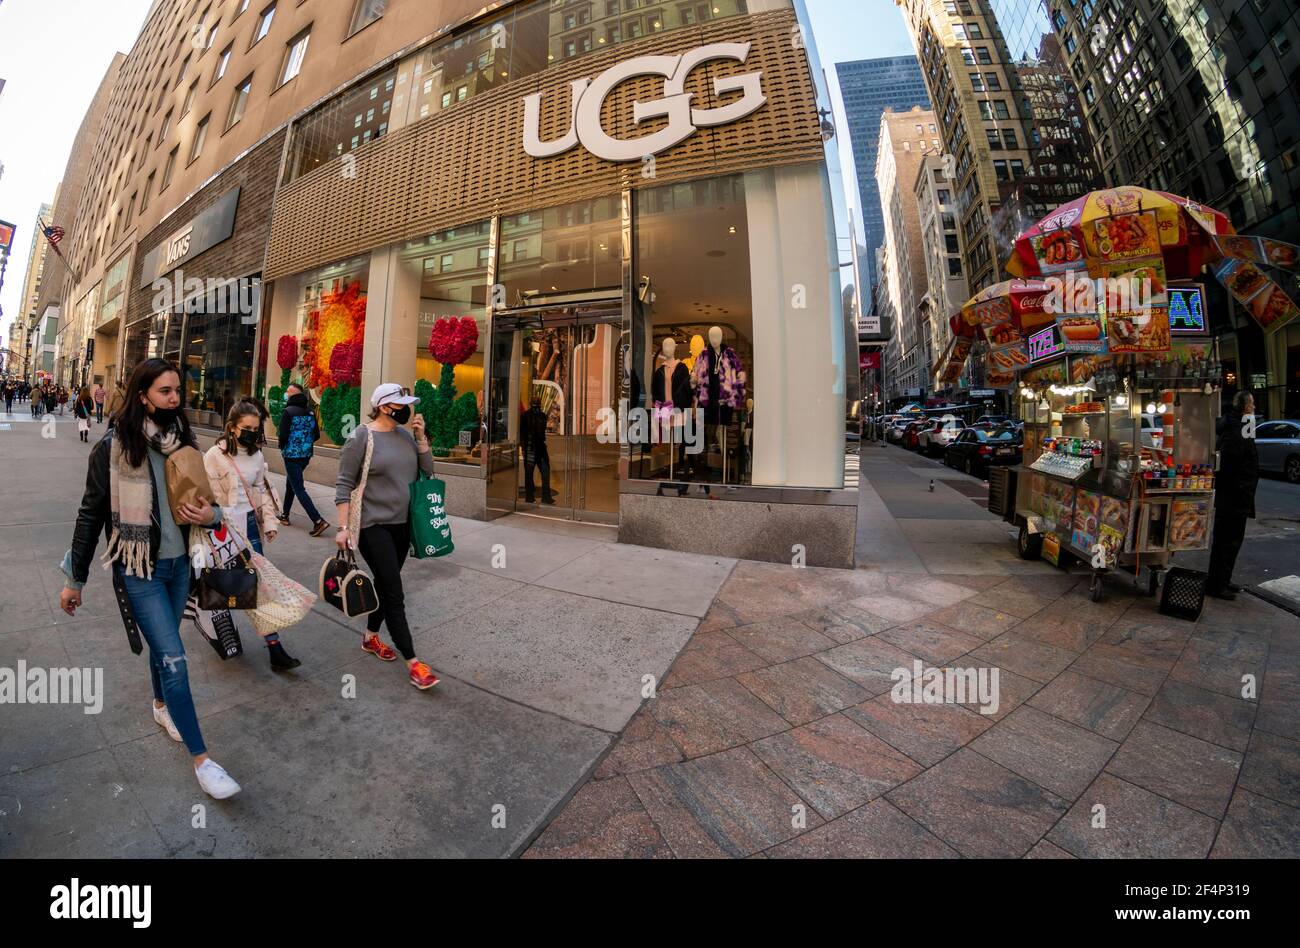 Ugg Store High Resolution Stock Photography and Images - Alamy